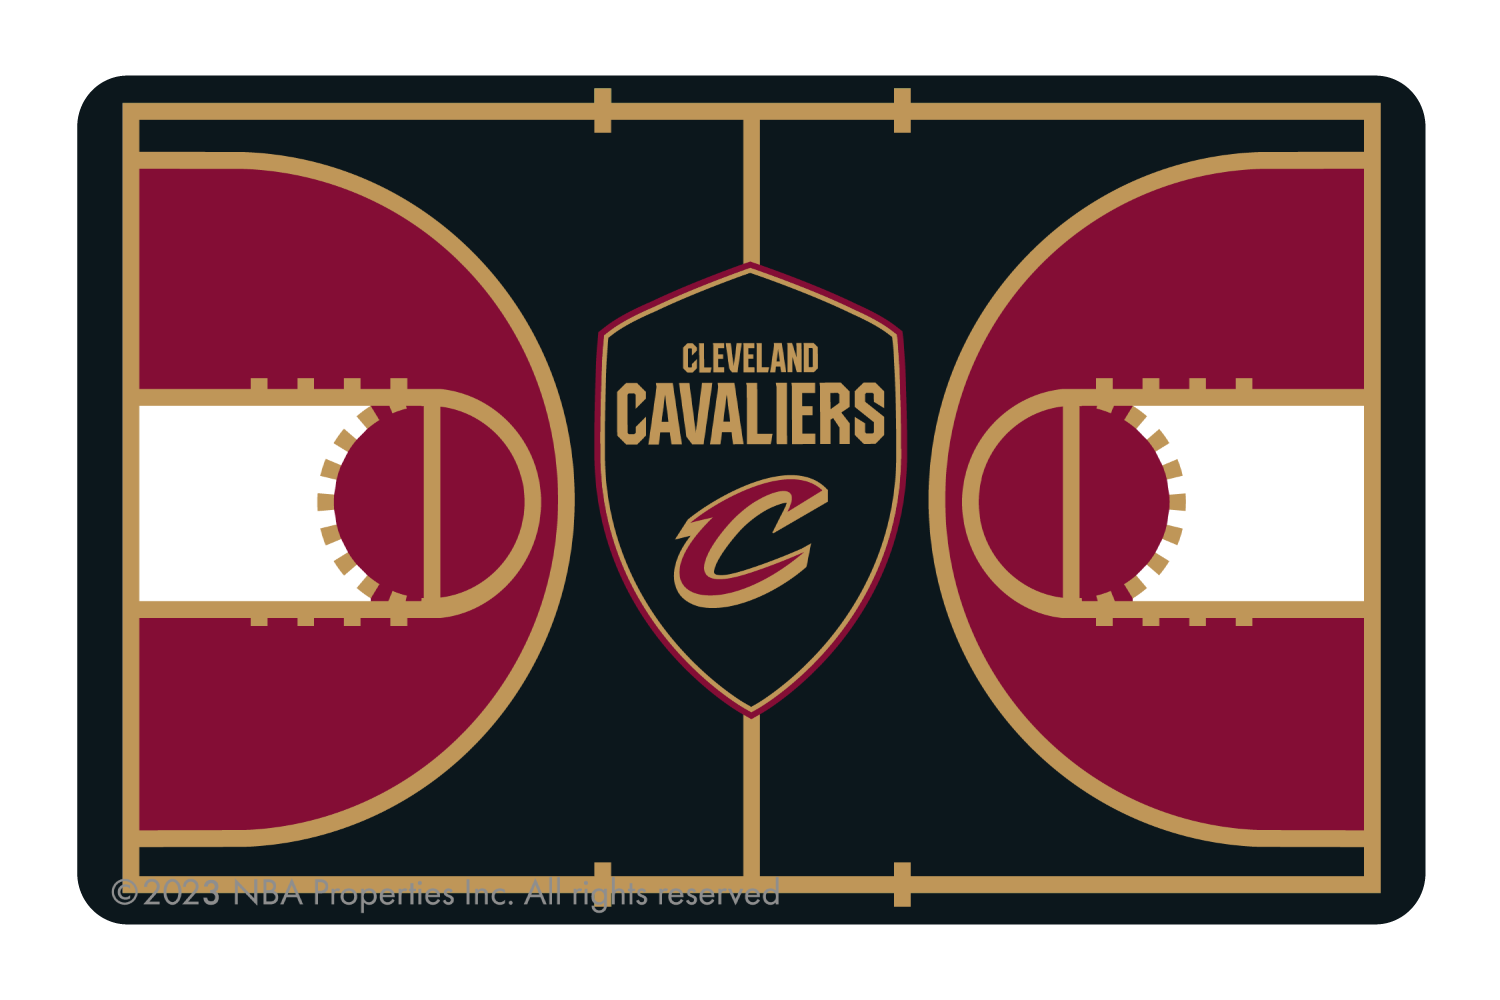 Cleveland Cavaliers: Courtside